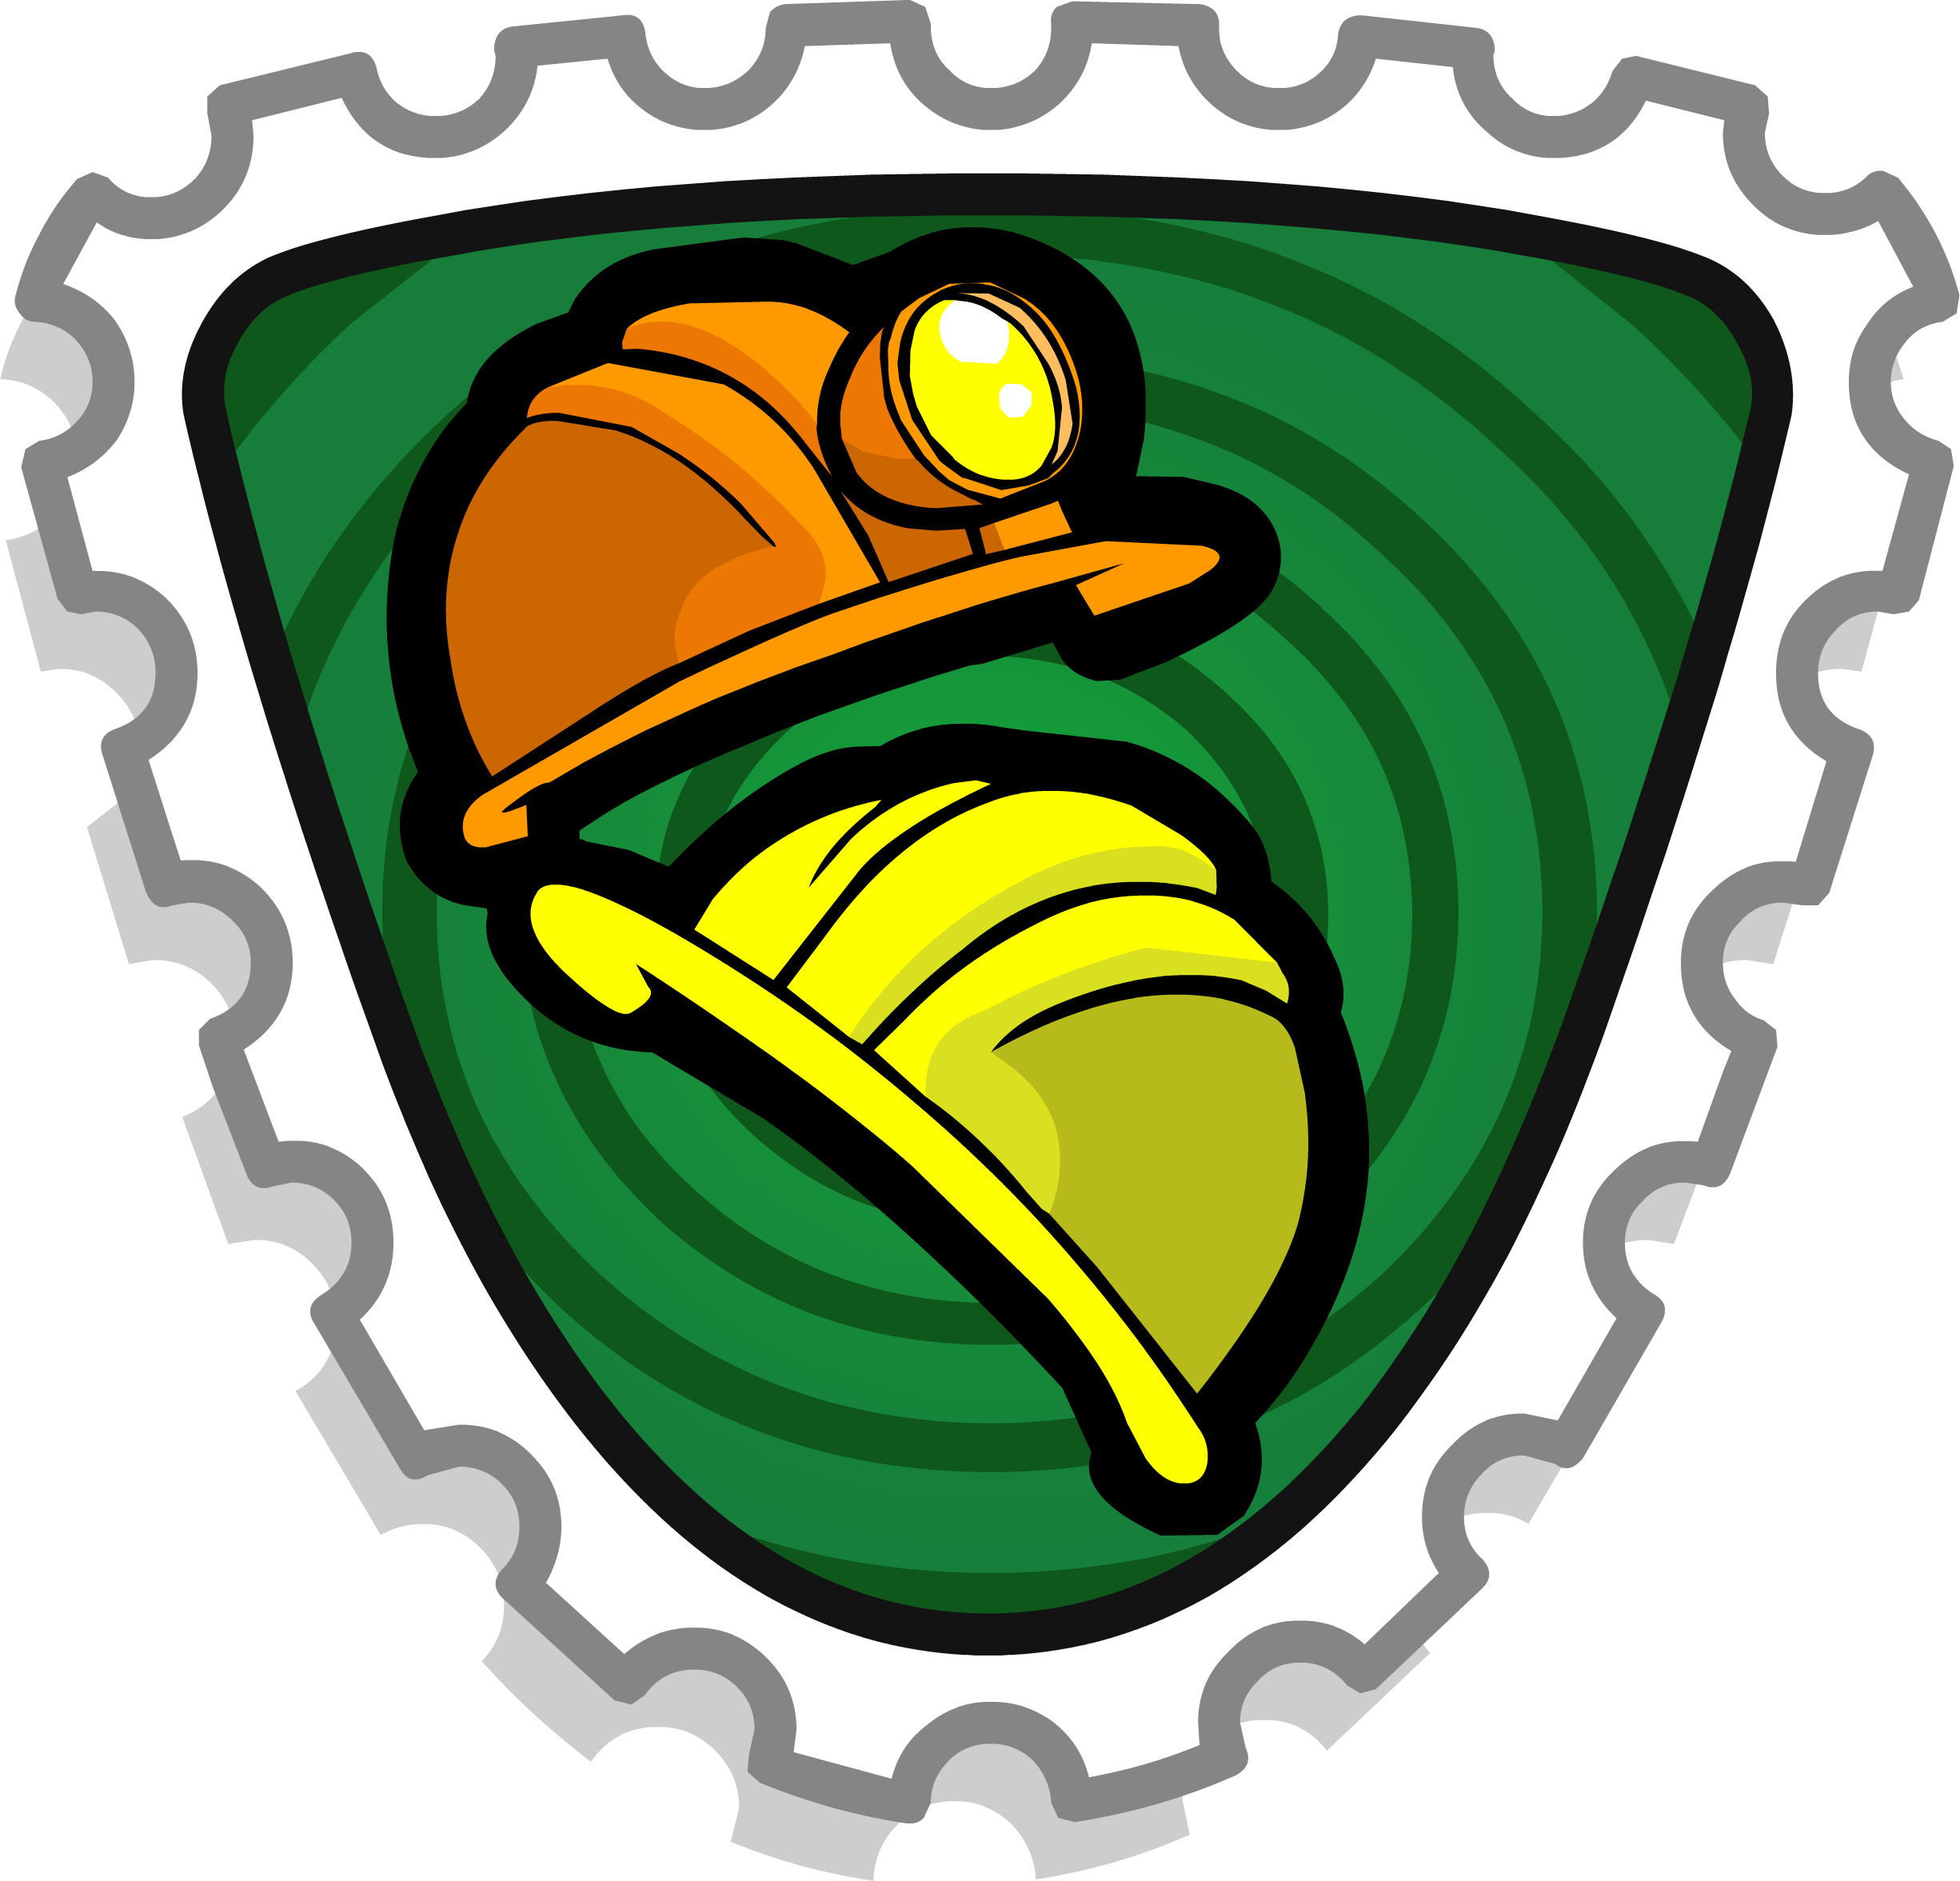 Construction Stamp - Club Penguin Extreme Stamp (2451x2352)